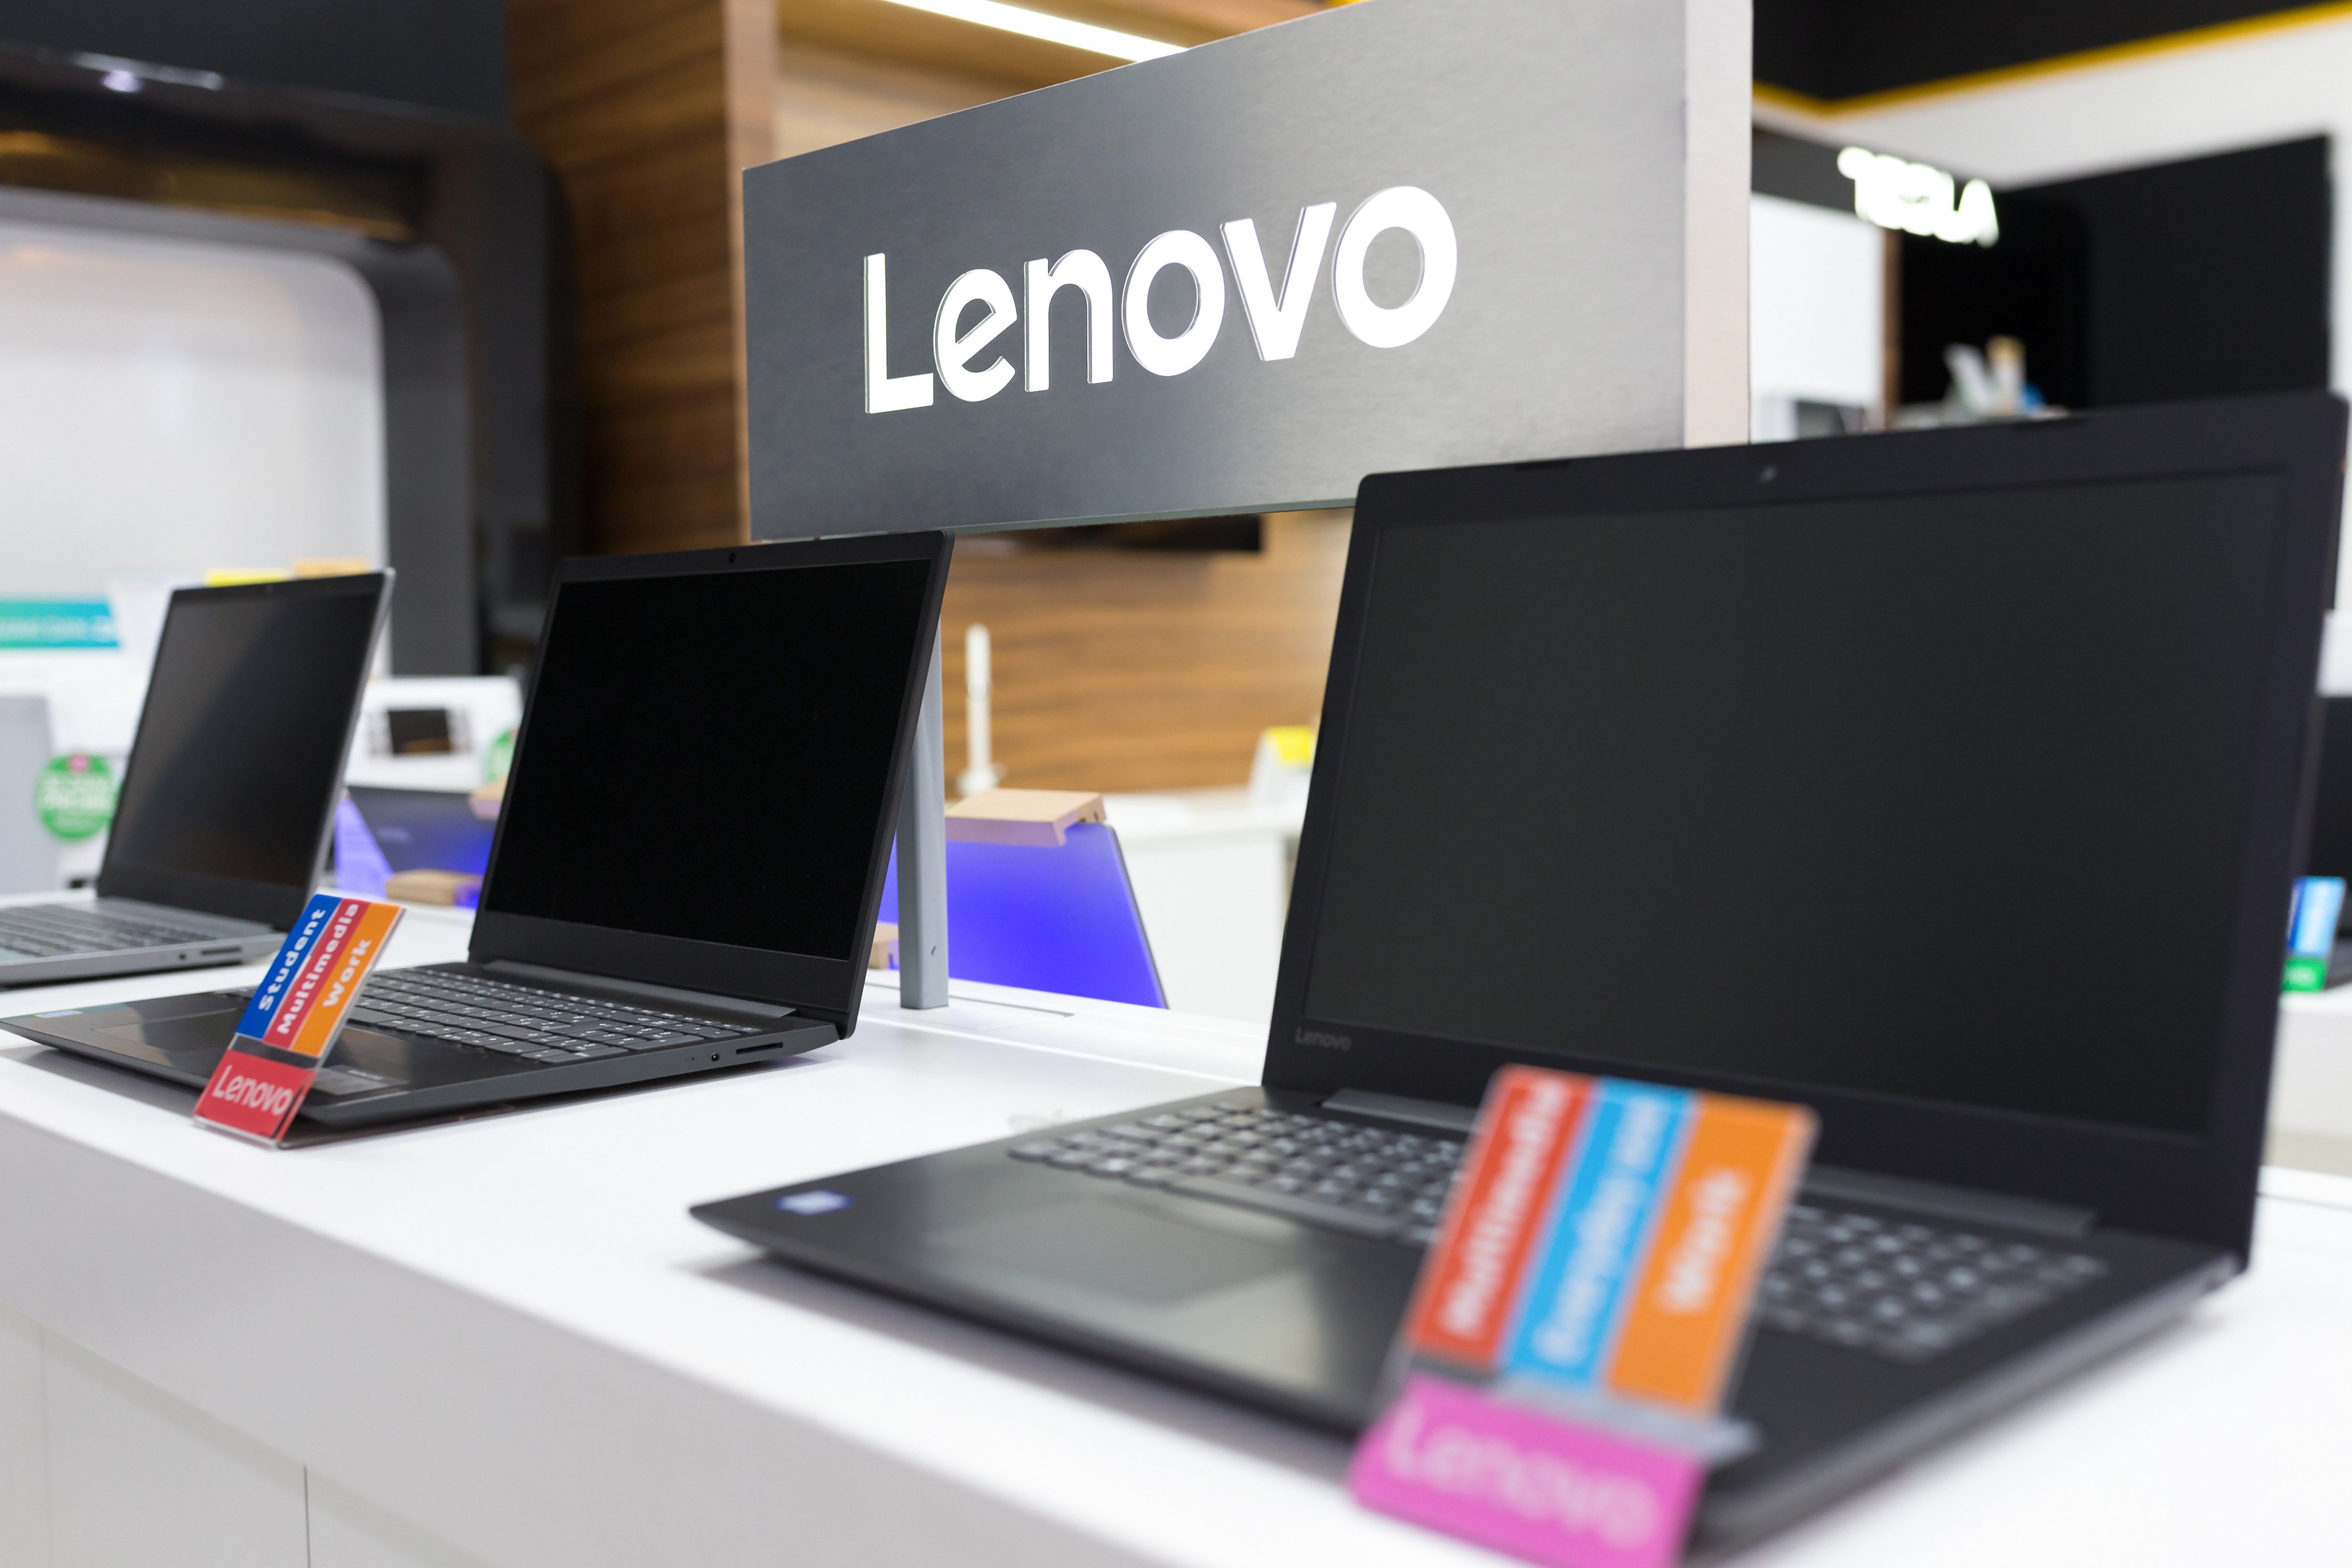 Lenovo laptop computers displayed at an electronics store in Belgrade, Serbia, on December 5, 2019. Photo: Shutterstock